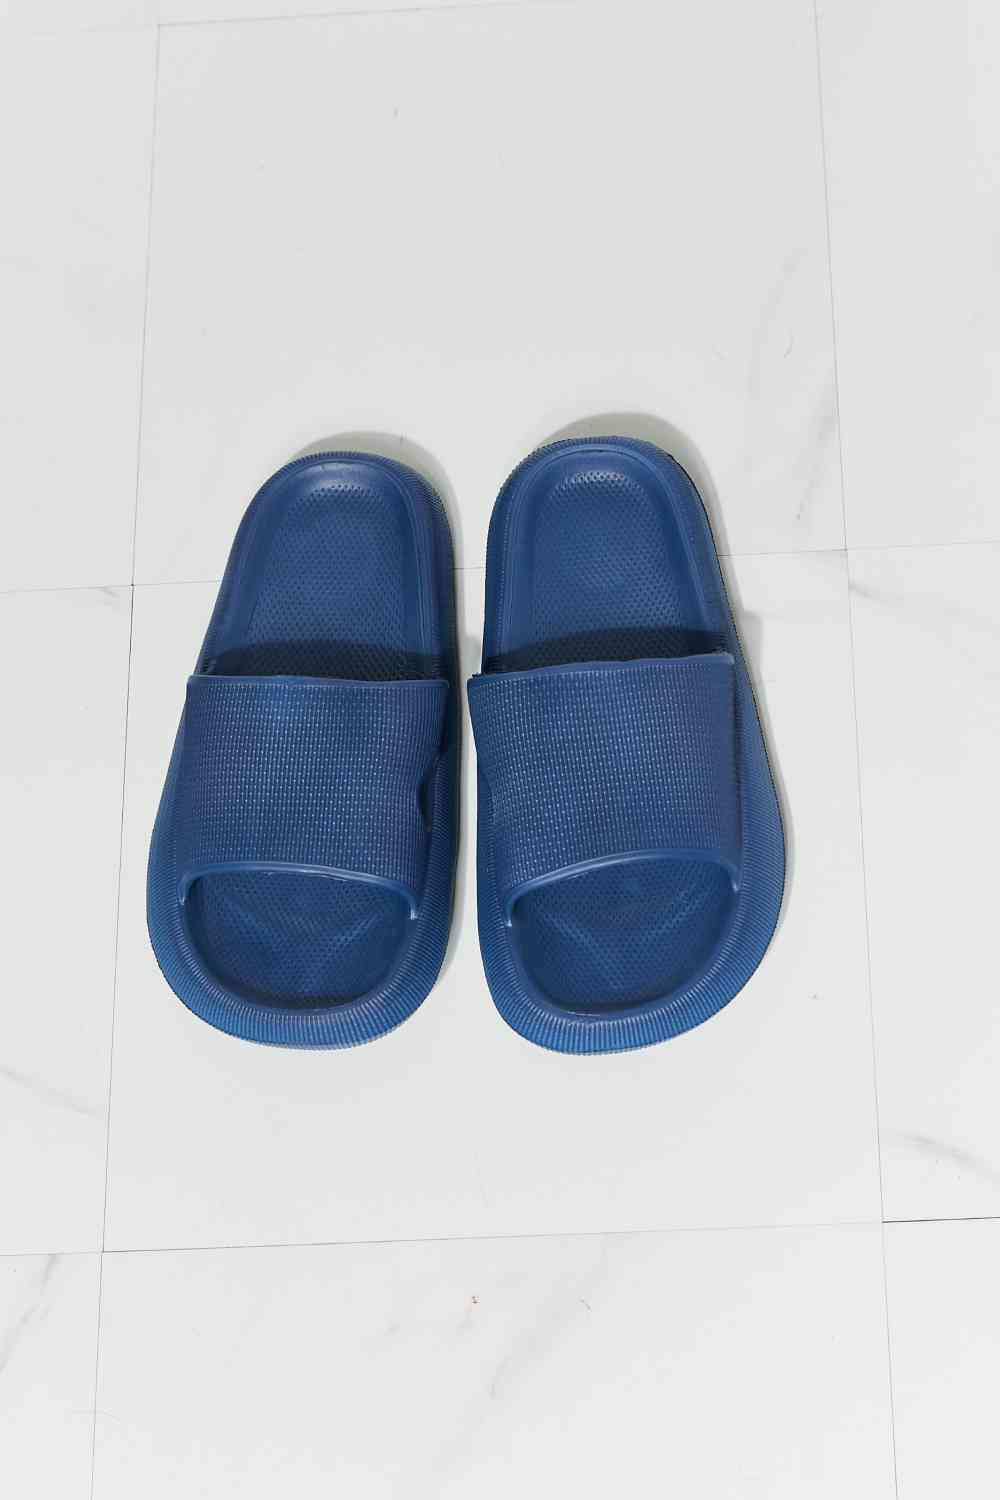 Arms Around Me Open Toe Slide in Navy - Accessories - Shoes - 4 - 2024